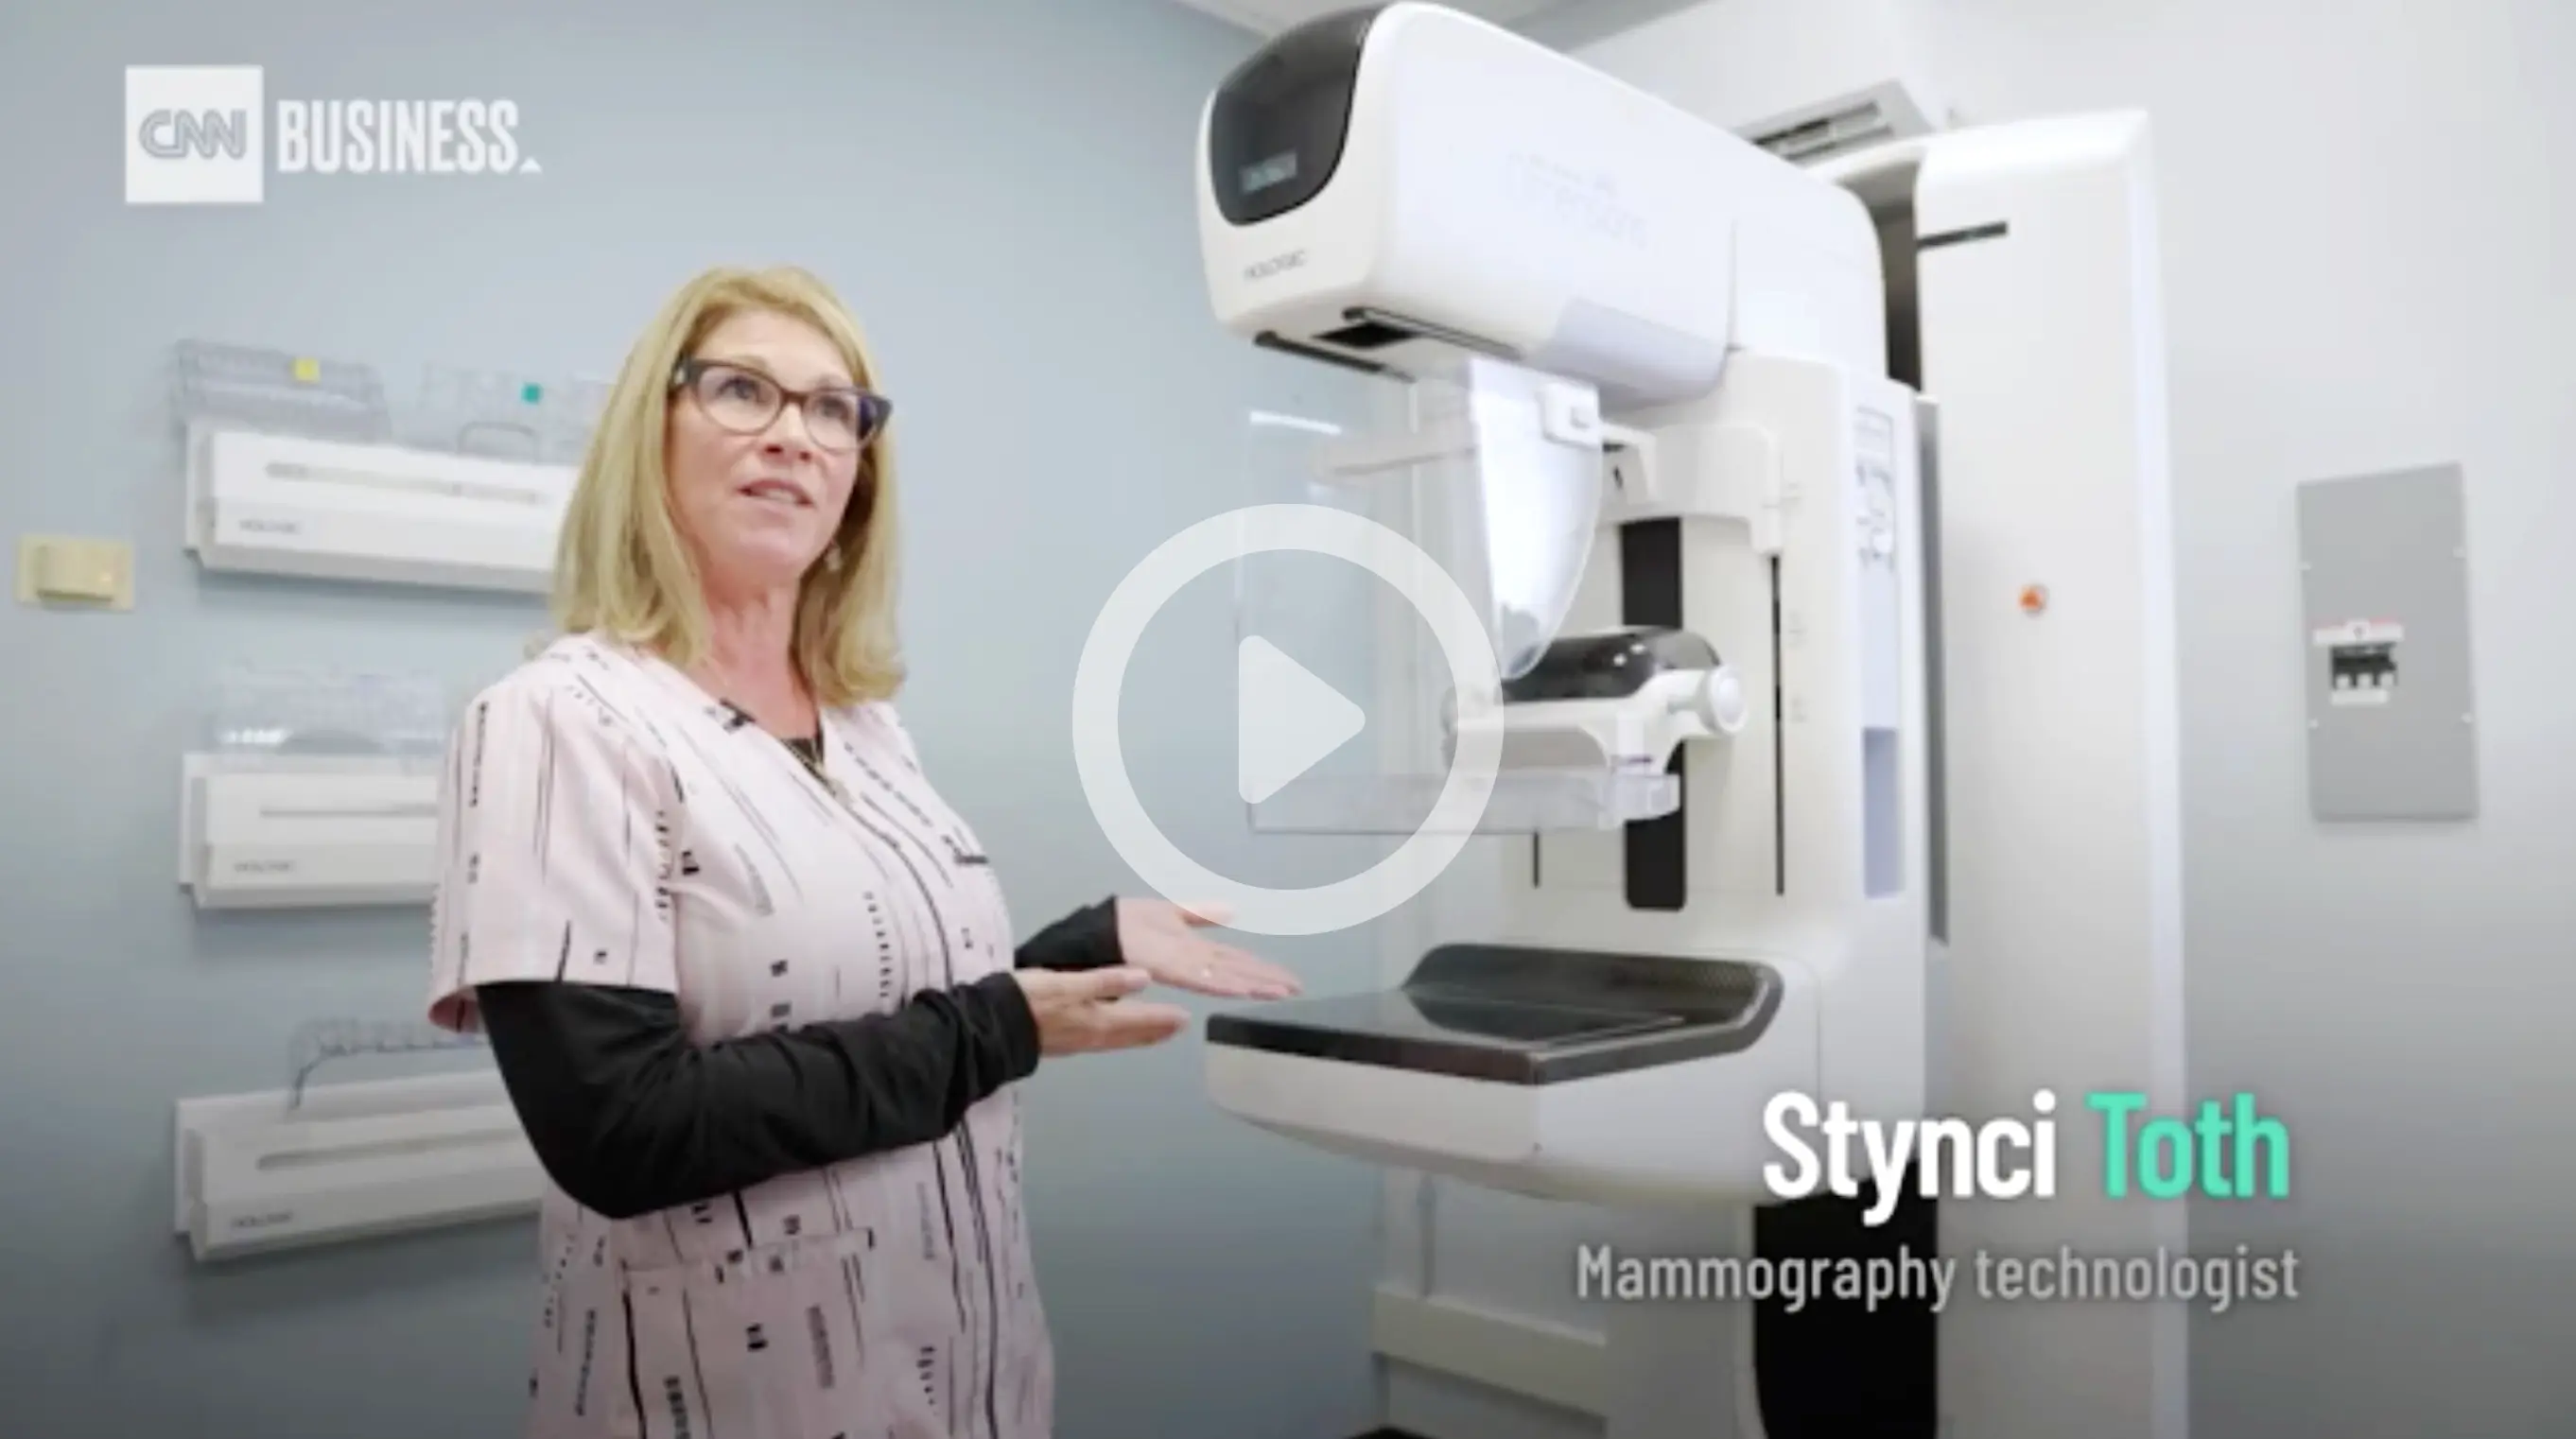 You can now get a mammogram at Walmart. Here’s why that matters.